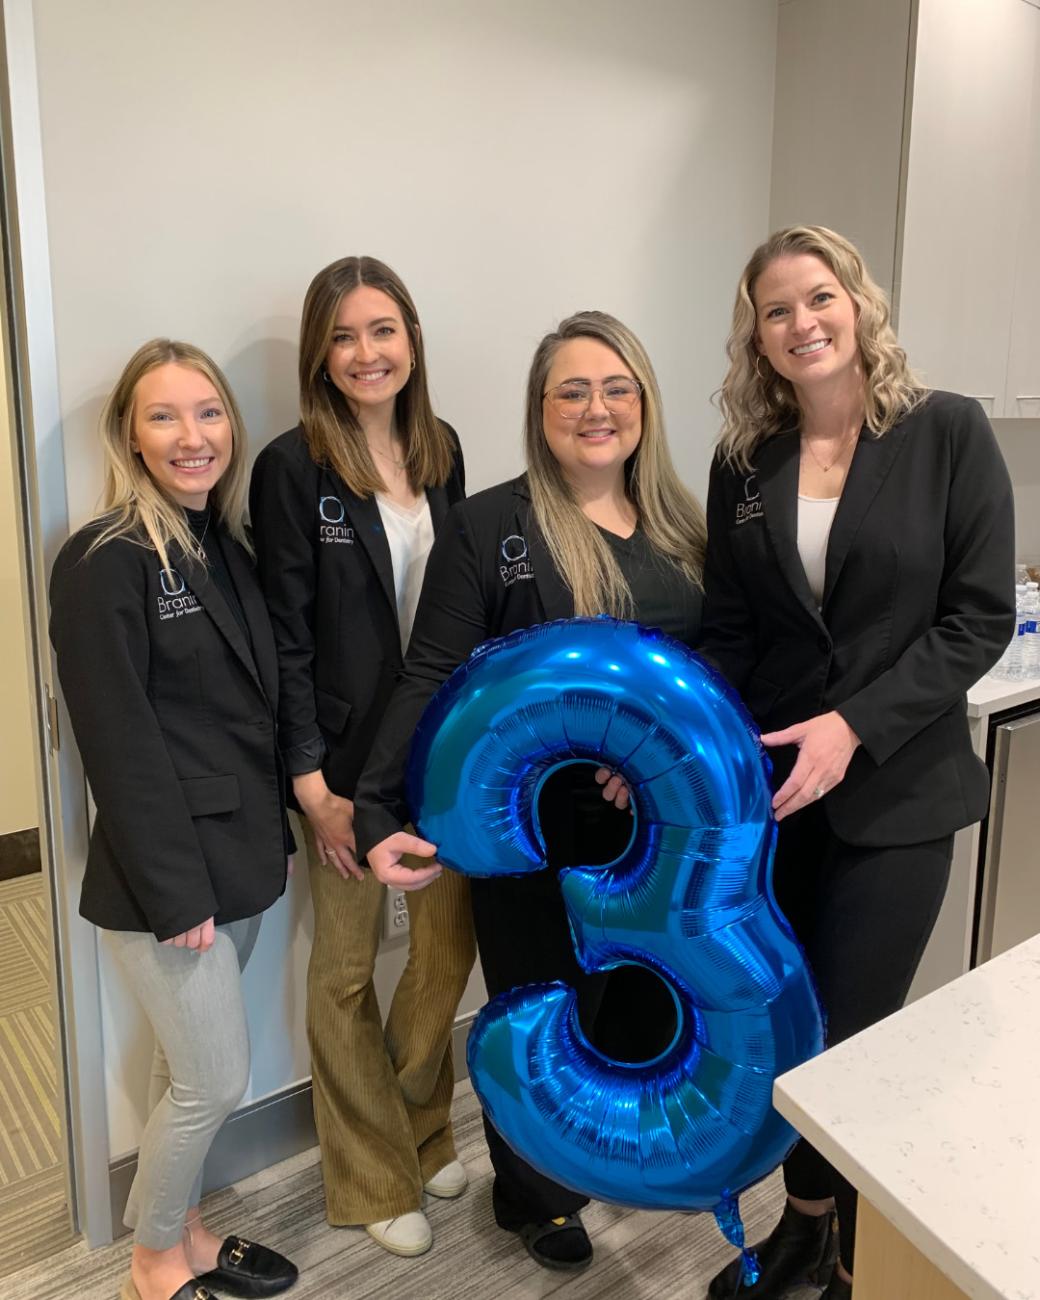 Team members holding a balloon shaped like a number three